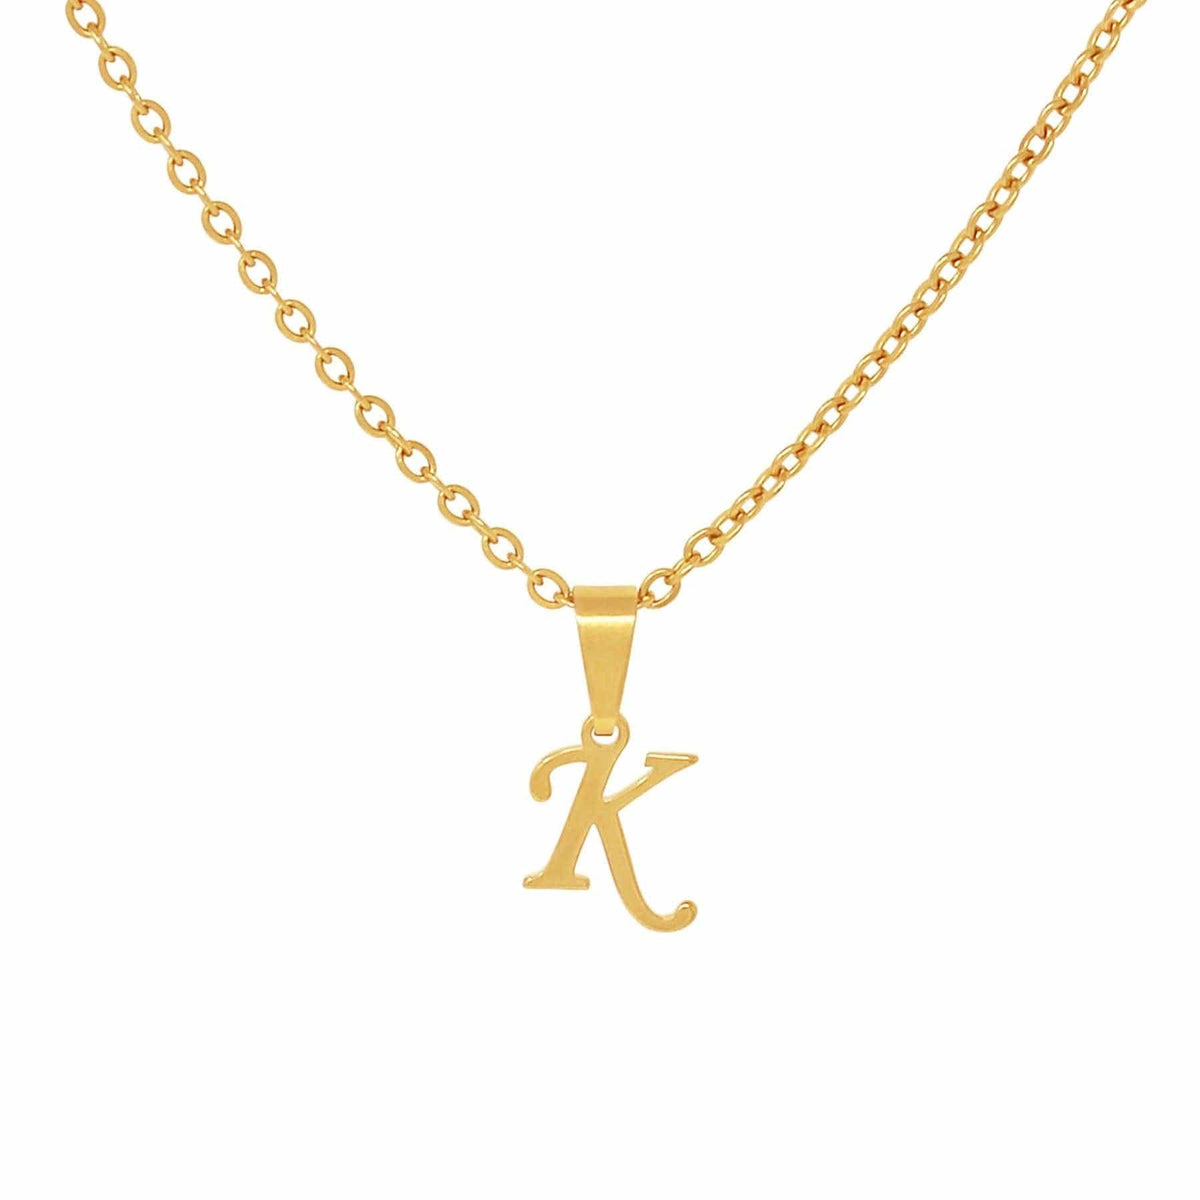 BohoMoon Stainless Steel Petite Initial Choker / Necklace Gold / A / Choker